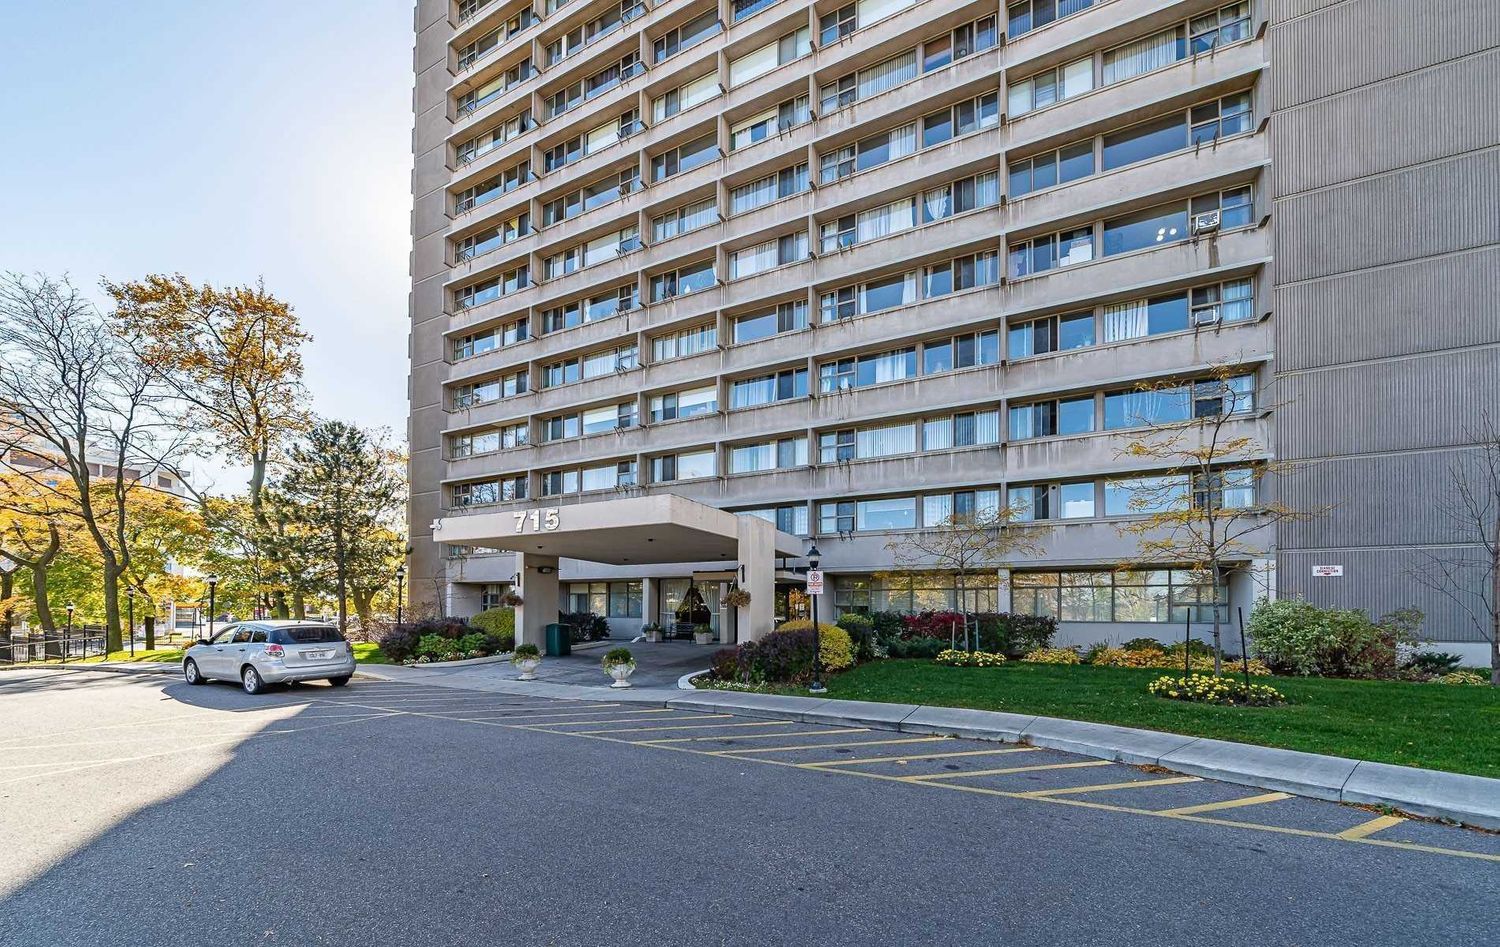 715-735 Don Mills Road. 715 Don Mills Condos is located in  North York, Toronto - image #2 of 2